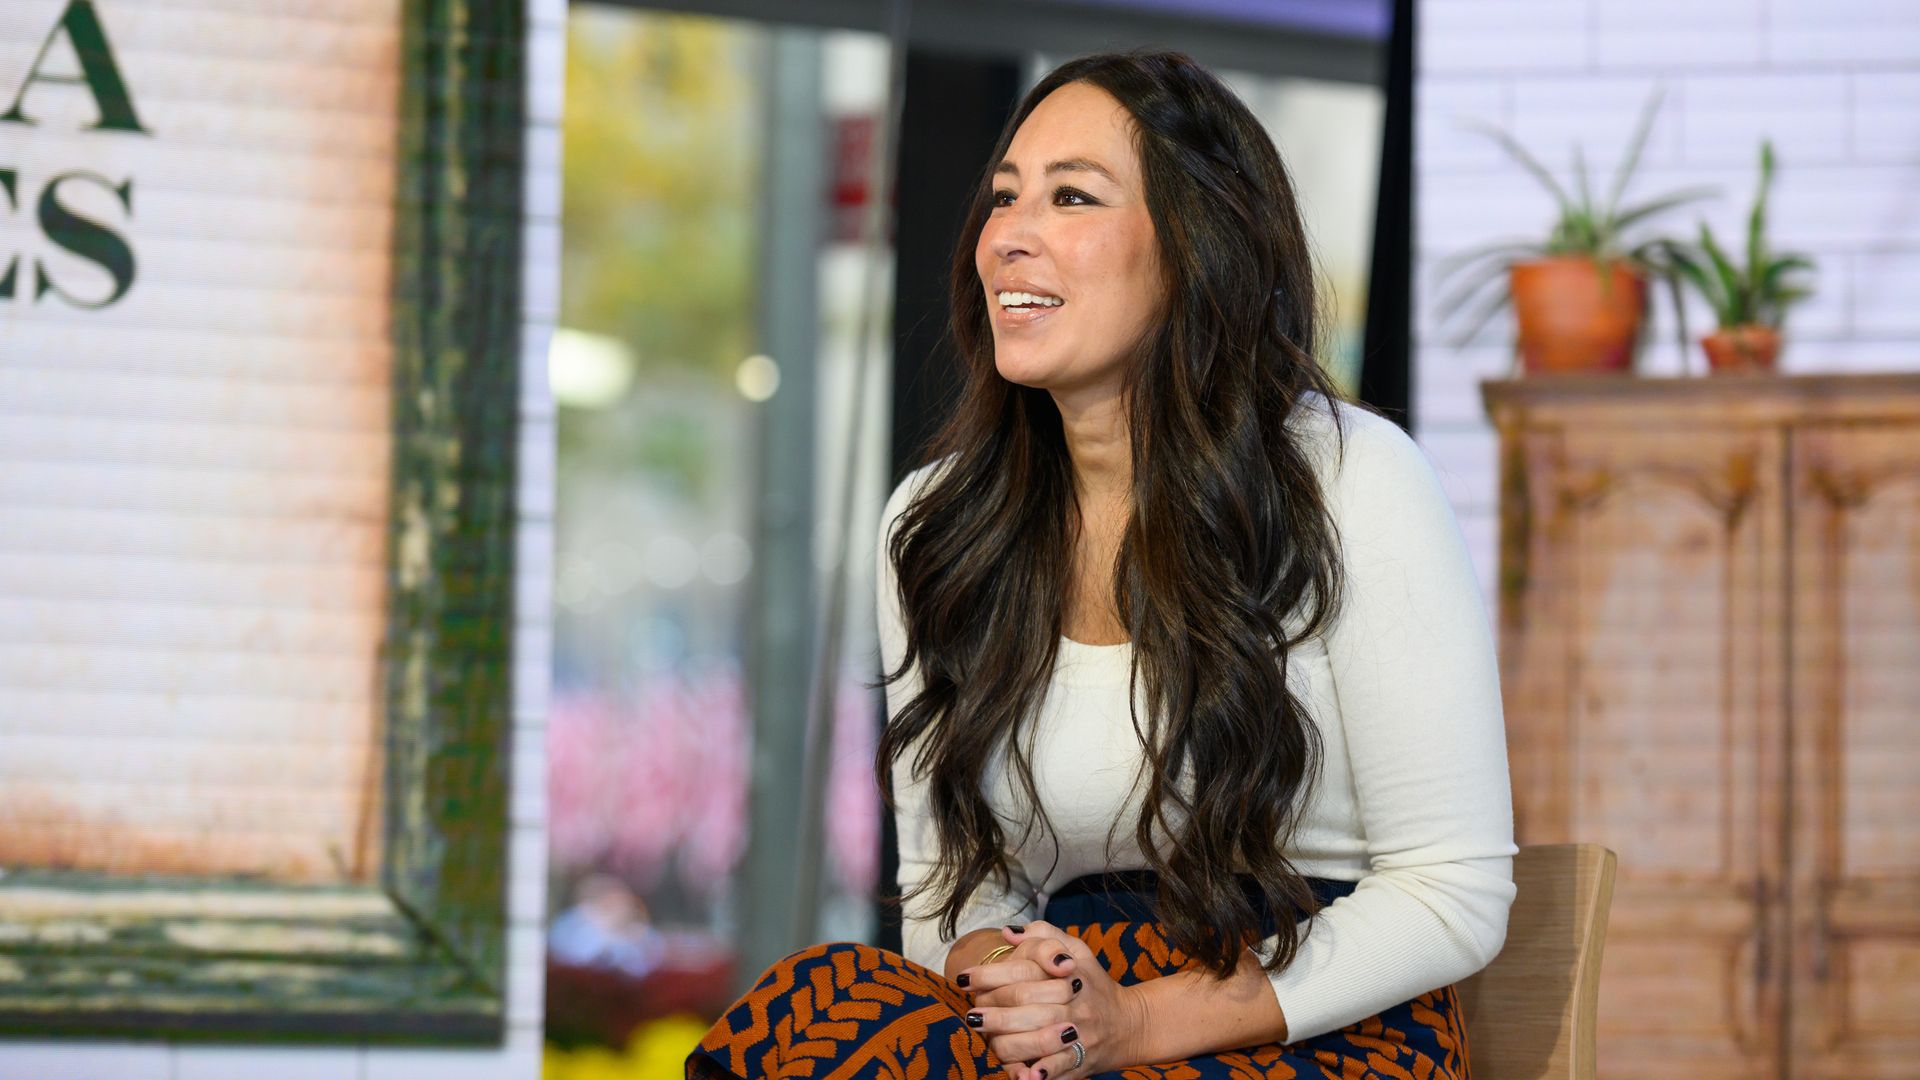 Joanna Gaines in a white top and patterned skirt